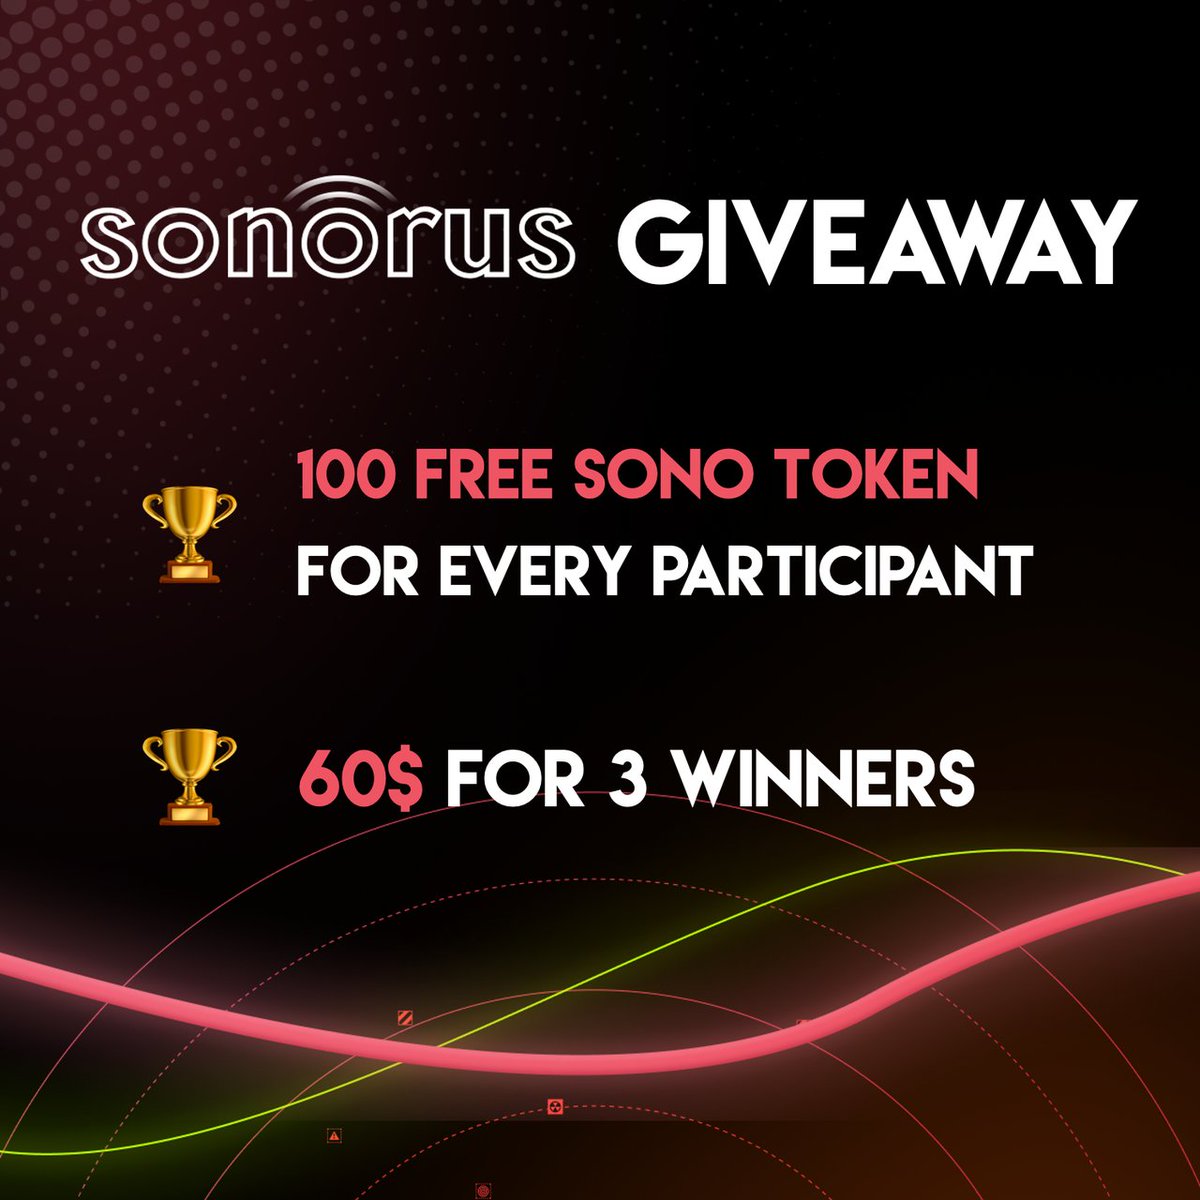 #Giveaway to celebrate WebApp Beta
🏆Get 100 FREE TOKEN
🏆3x20 $USDC

To Enter:
✅Register&Claim FREE TOKEN:bit.ly/3LJ9PPi
✅Fw @SonorusOfficial& @Sonorus_Mike
✅RT+Like+Tag 3 frds
✅Join Discord: discord.gg/43rz97vpP8

Winner announced on Discord
End:02/10 24:00 UTC